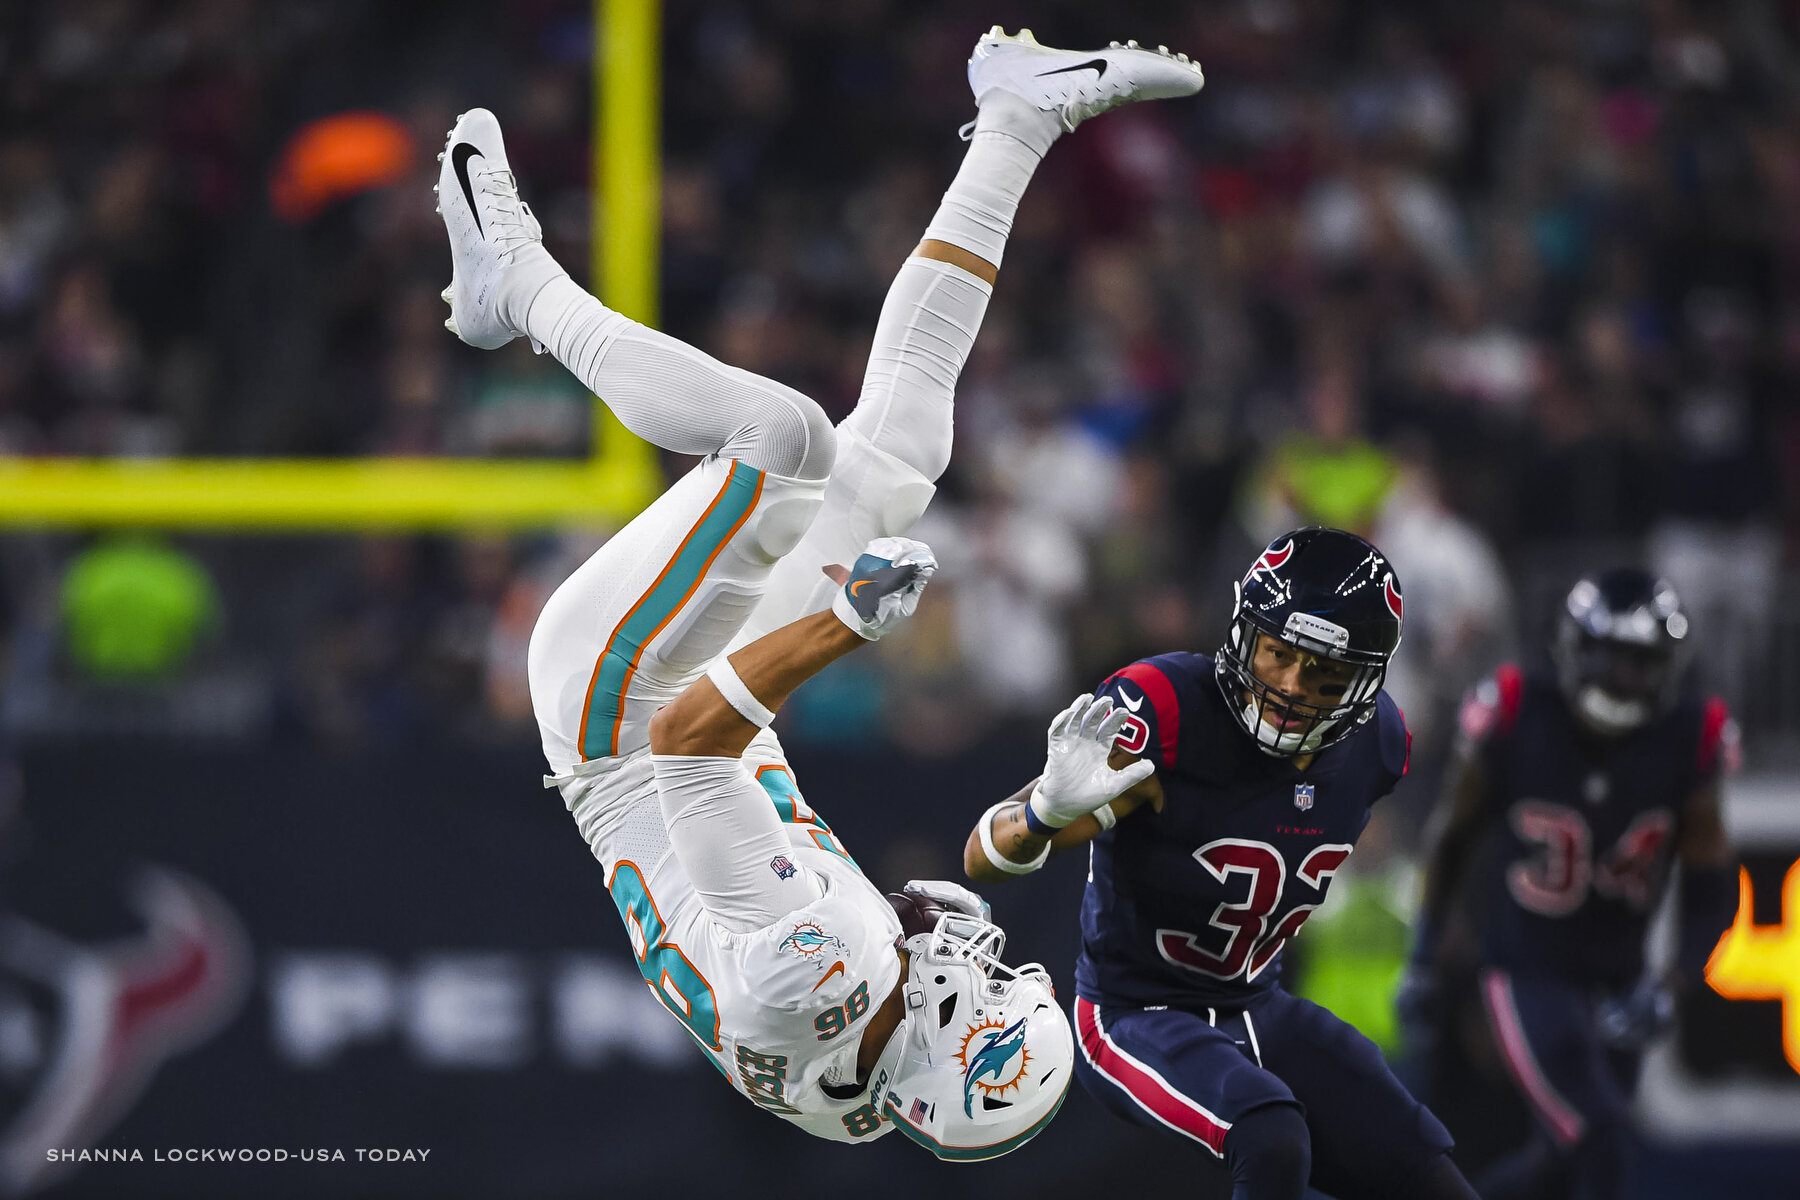  Oct 25, 2018; Houston, TX, USA; Miami Dolphins tight end Mike Gesicki (86) goes airborne after a tackle by Houston Texans strong safety Kareem Jackson (25, not pictured) during the second quarter at NRG Stadium. Mandatory Credit: Shanna Lockwood-USA